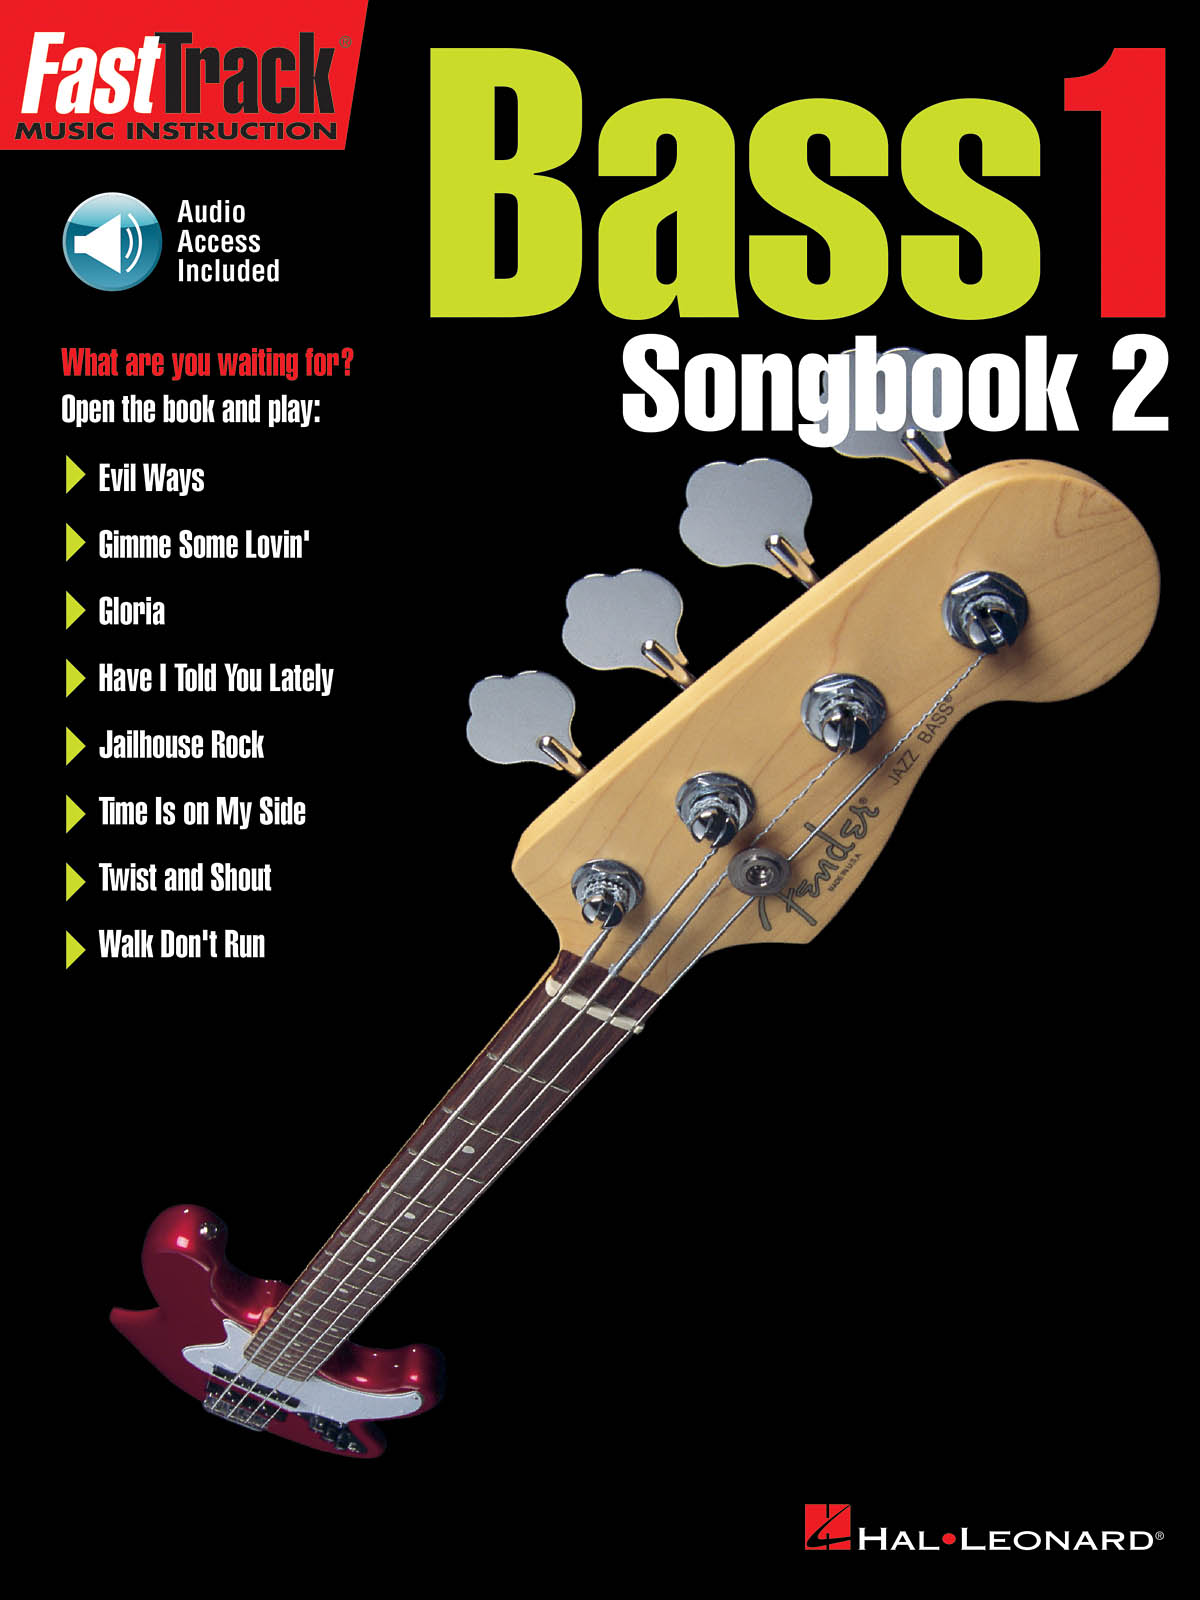 FastTrack - Bass 1 - Songbook 2: Bass Guitar Solo: Mixed Songbook